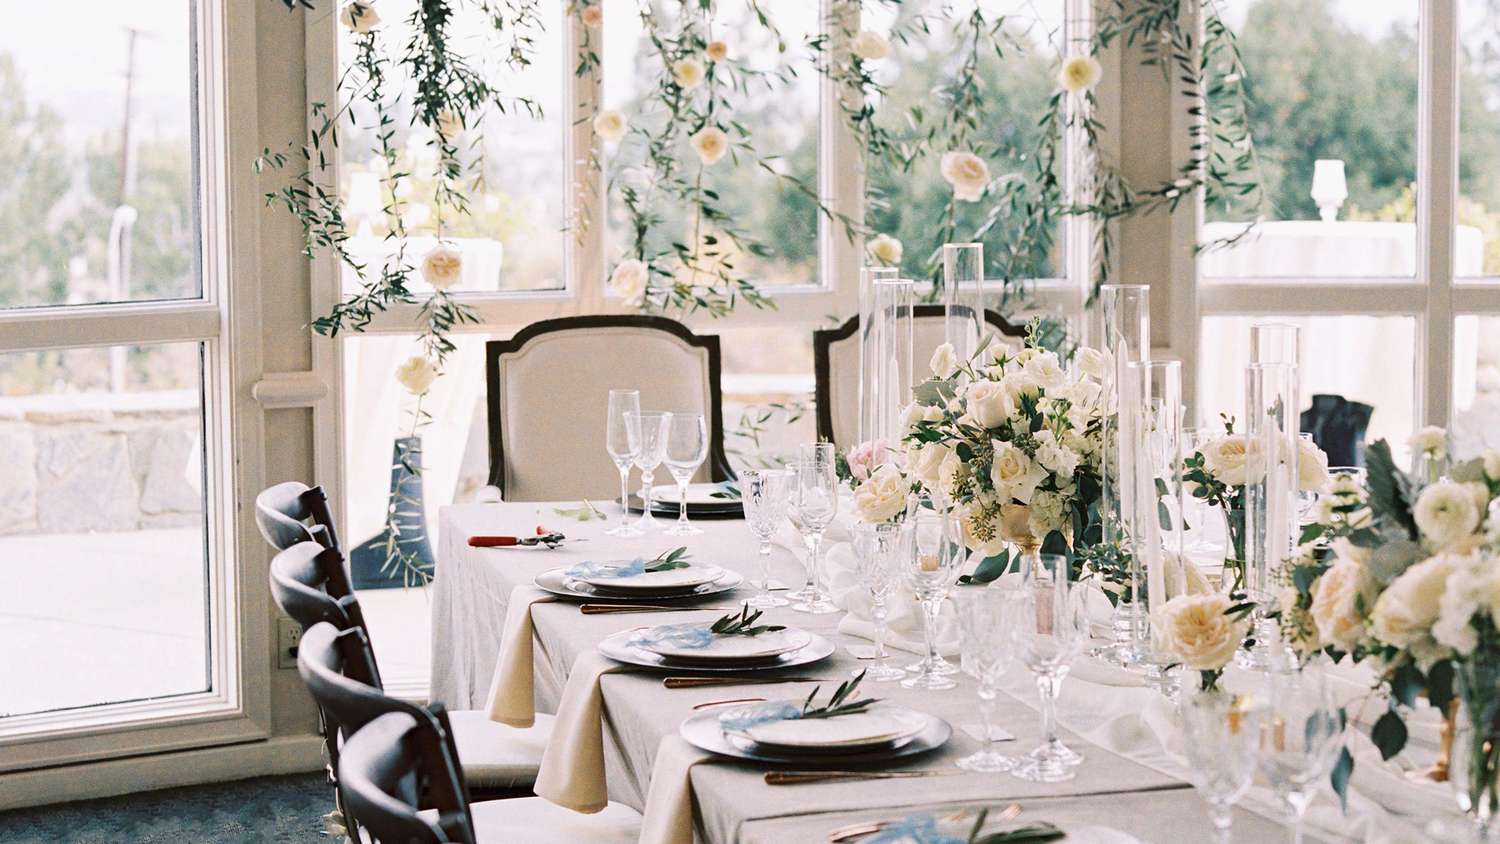 white dinner table setting in a hall with chair, table, floral decorations, plates, cutlery and napkins